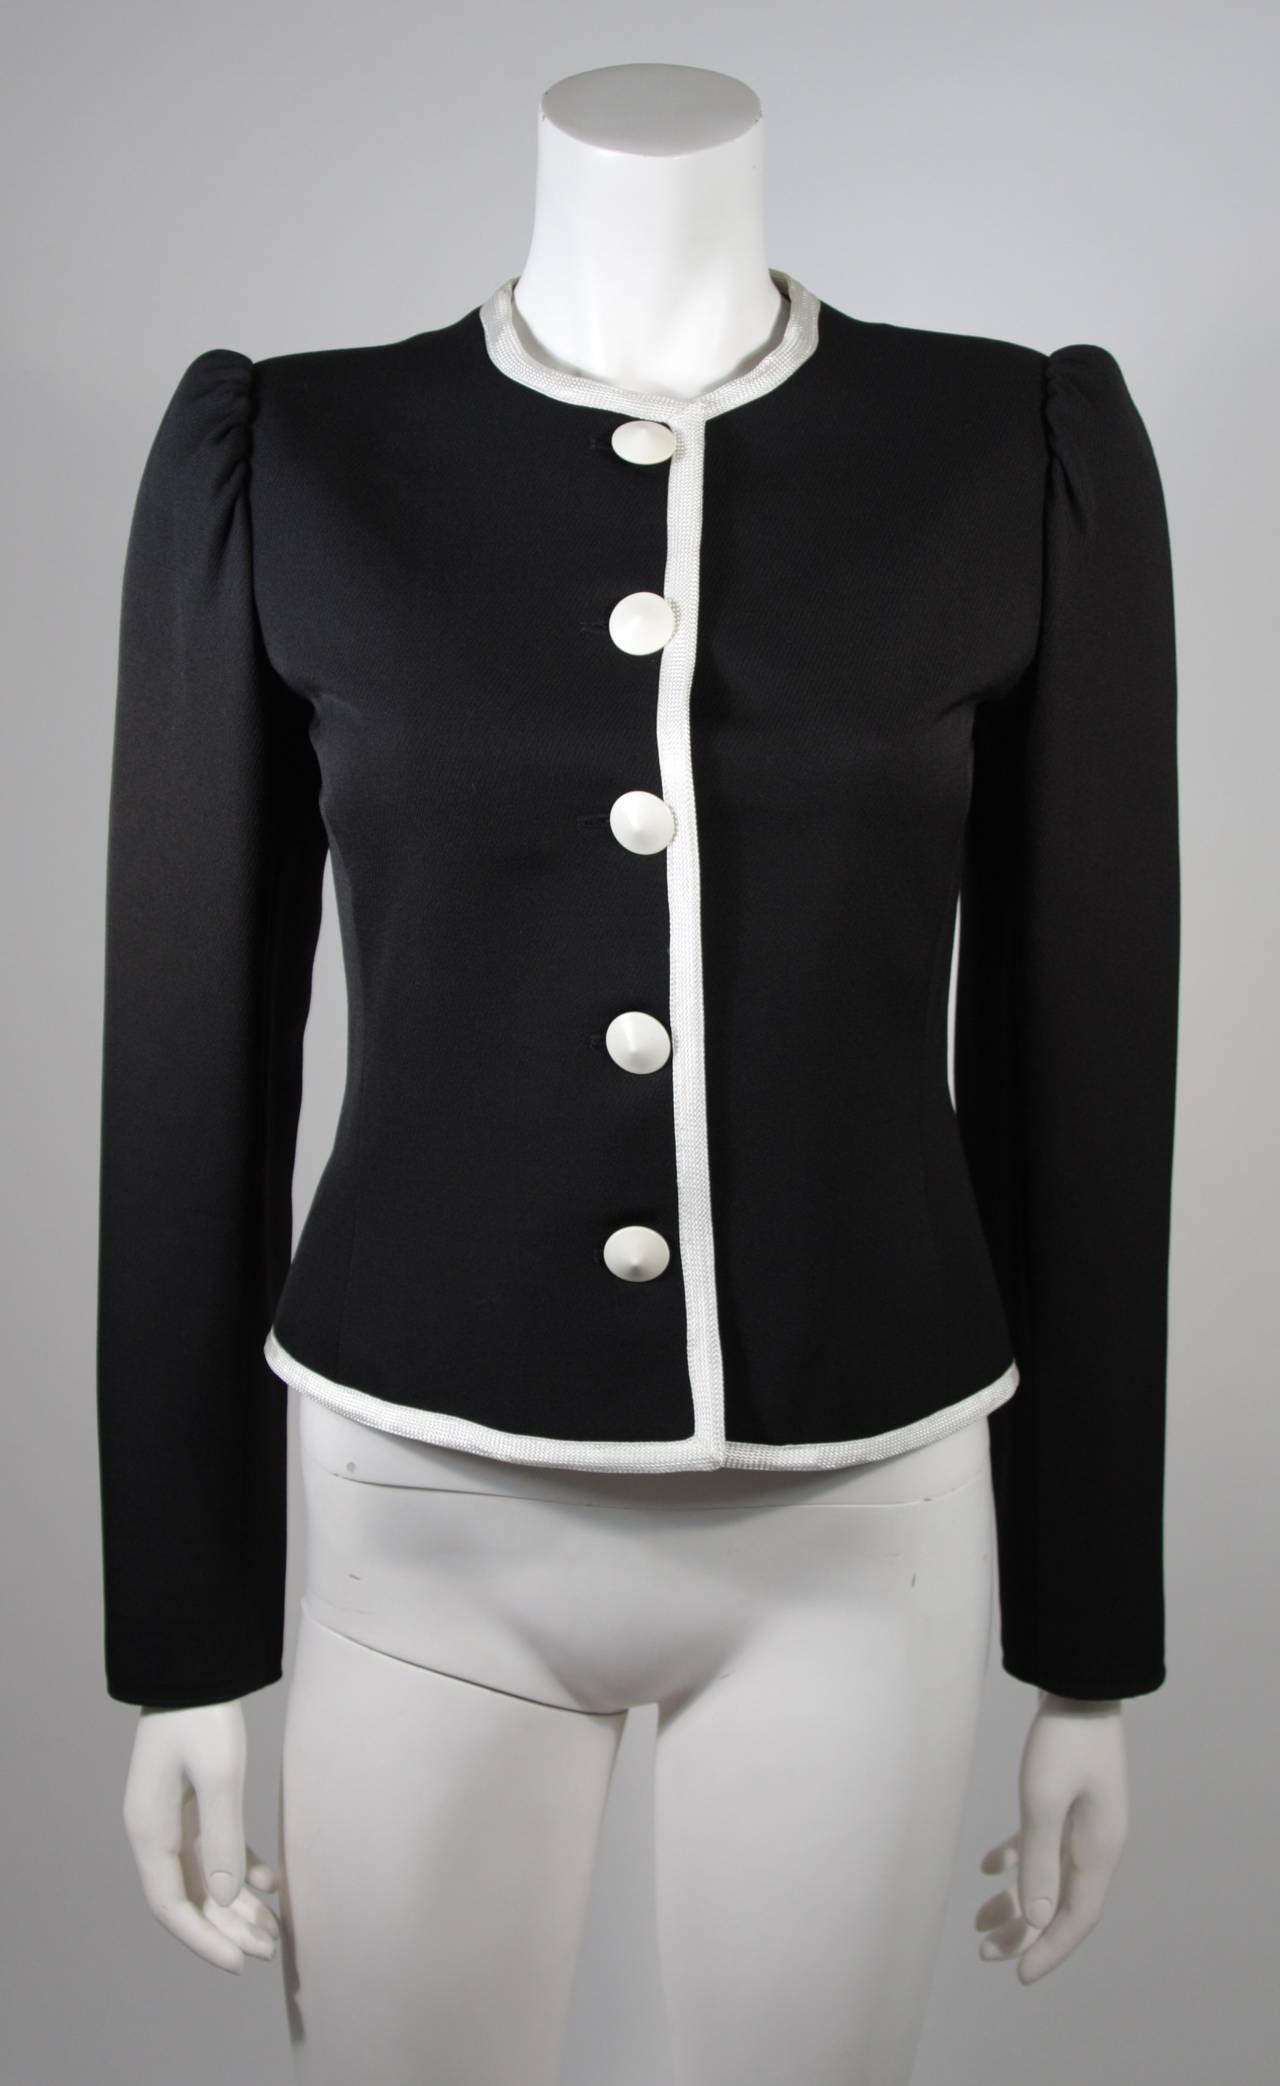 This Yves Saint Laurent jacket is composed of black wool blend with white trim. There are center front faceted buttons. Made in France. 

Measures (Approximately)
Length: 20